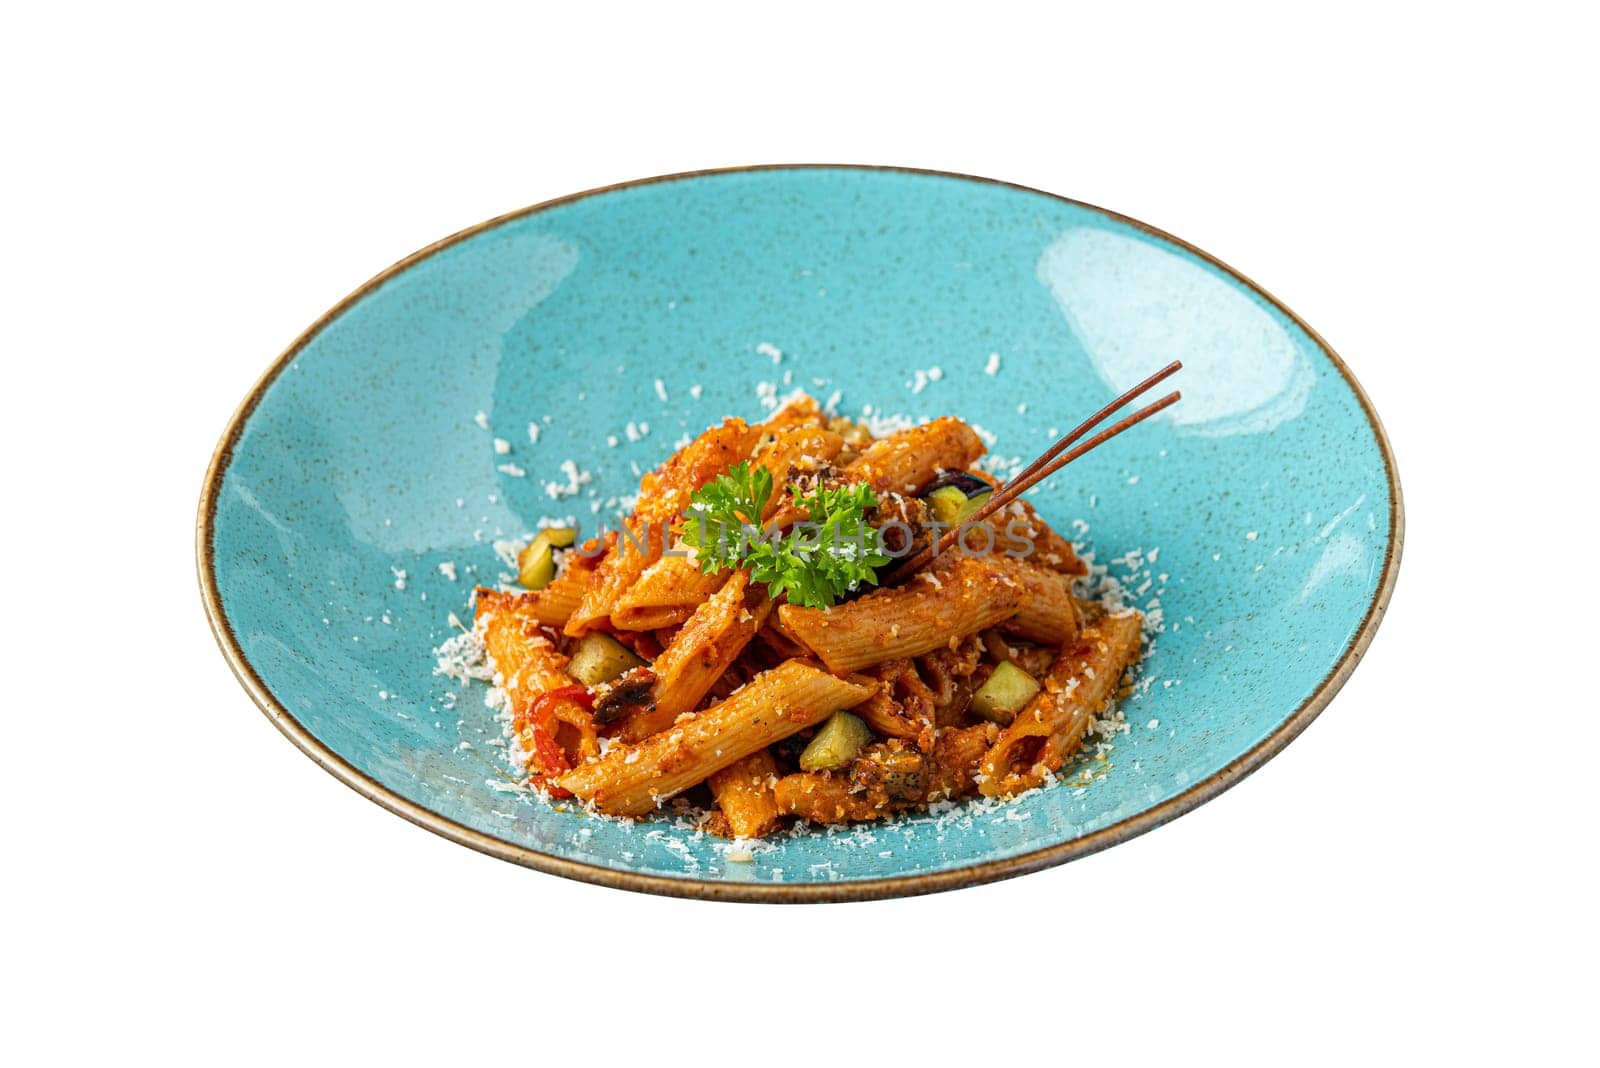 Penne pasta in tomato sauce, tomatoes decorated with parsley on a white background